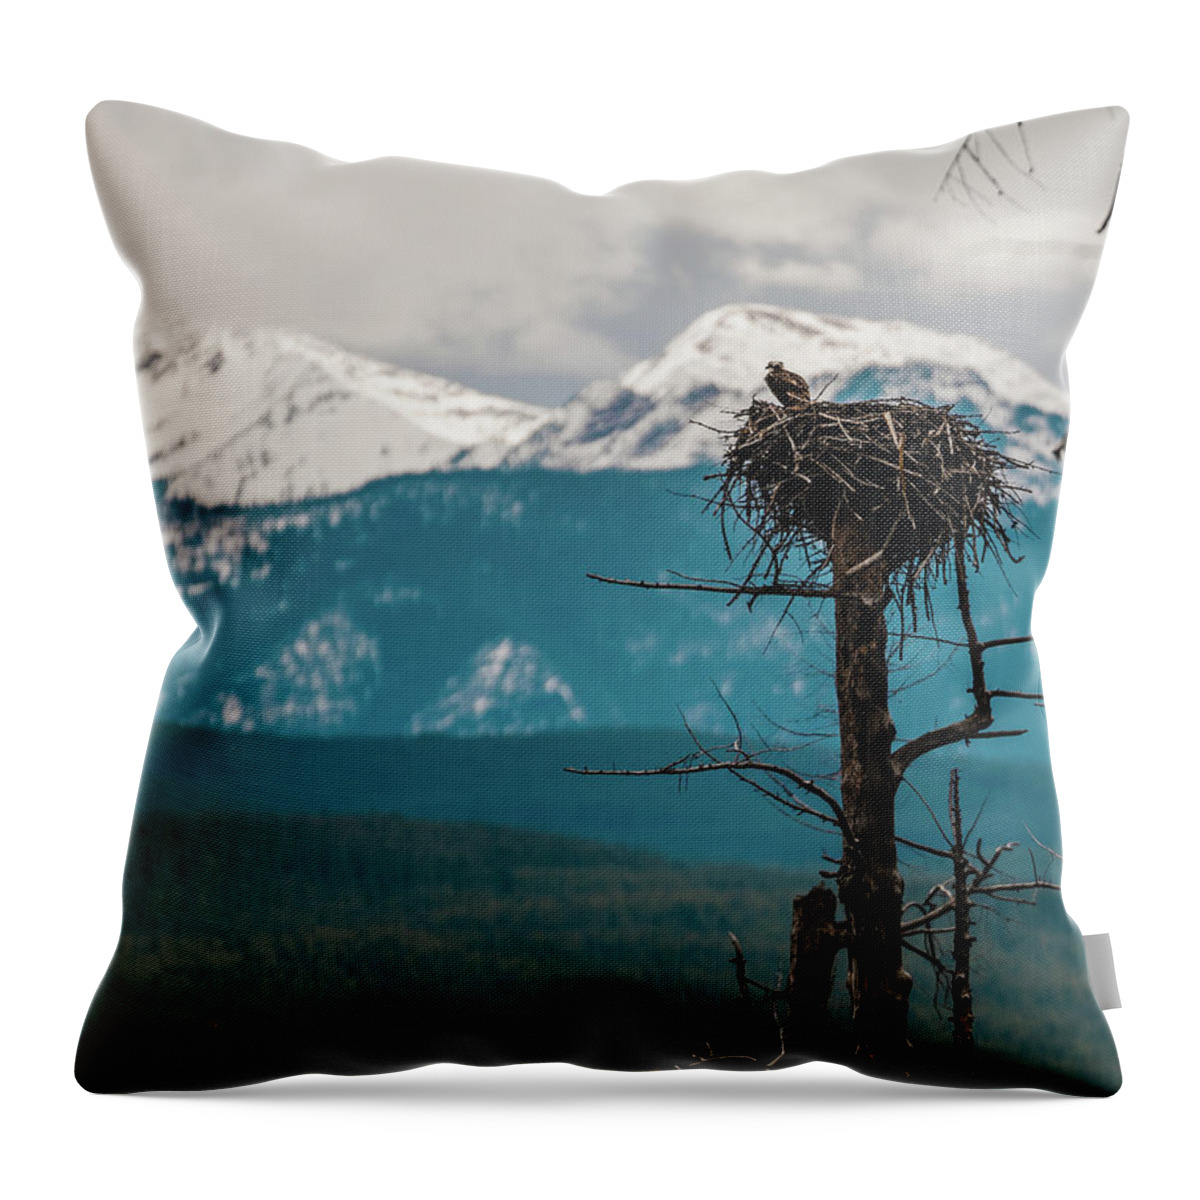  Throw Pillow featuring the photograph Nesting Osprey by William Boggs